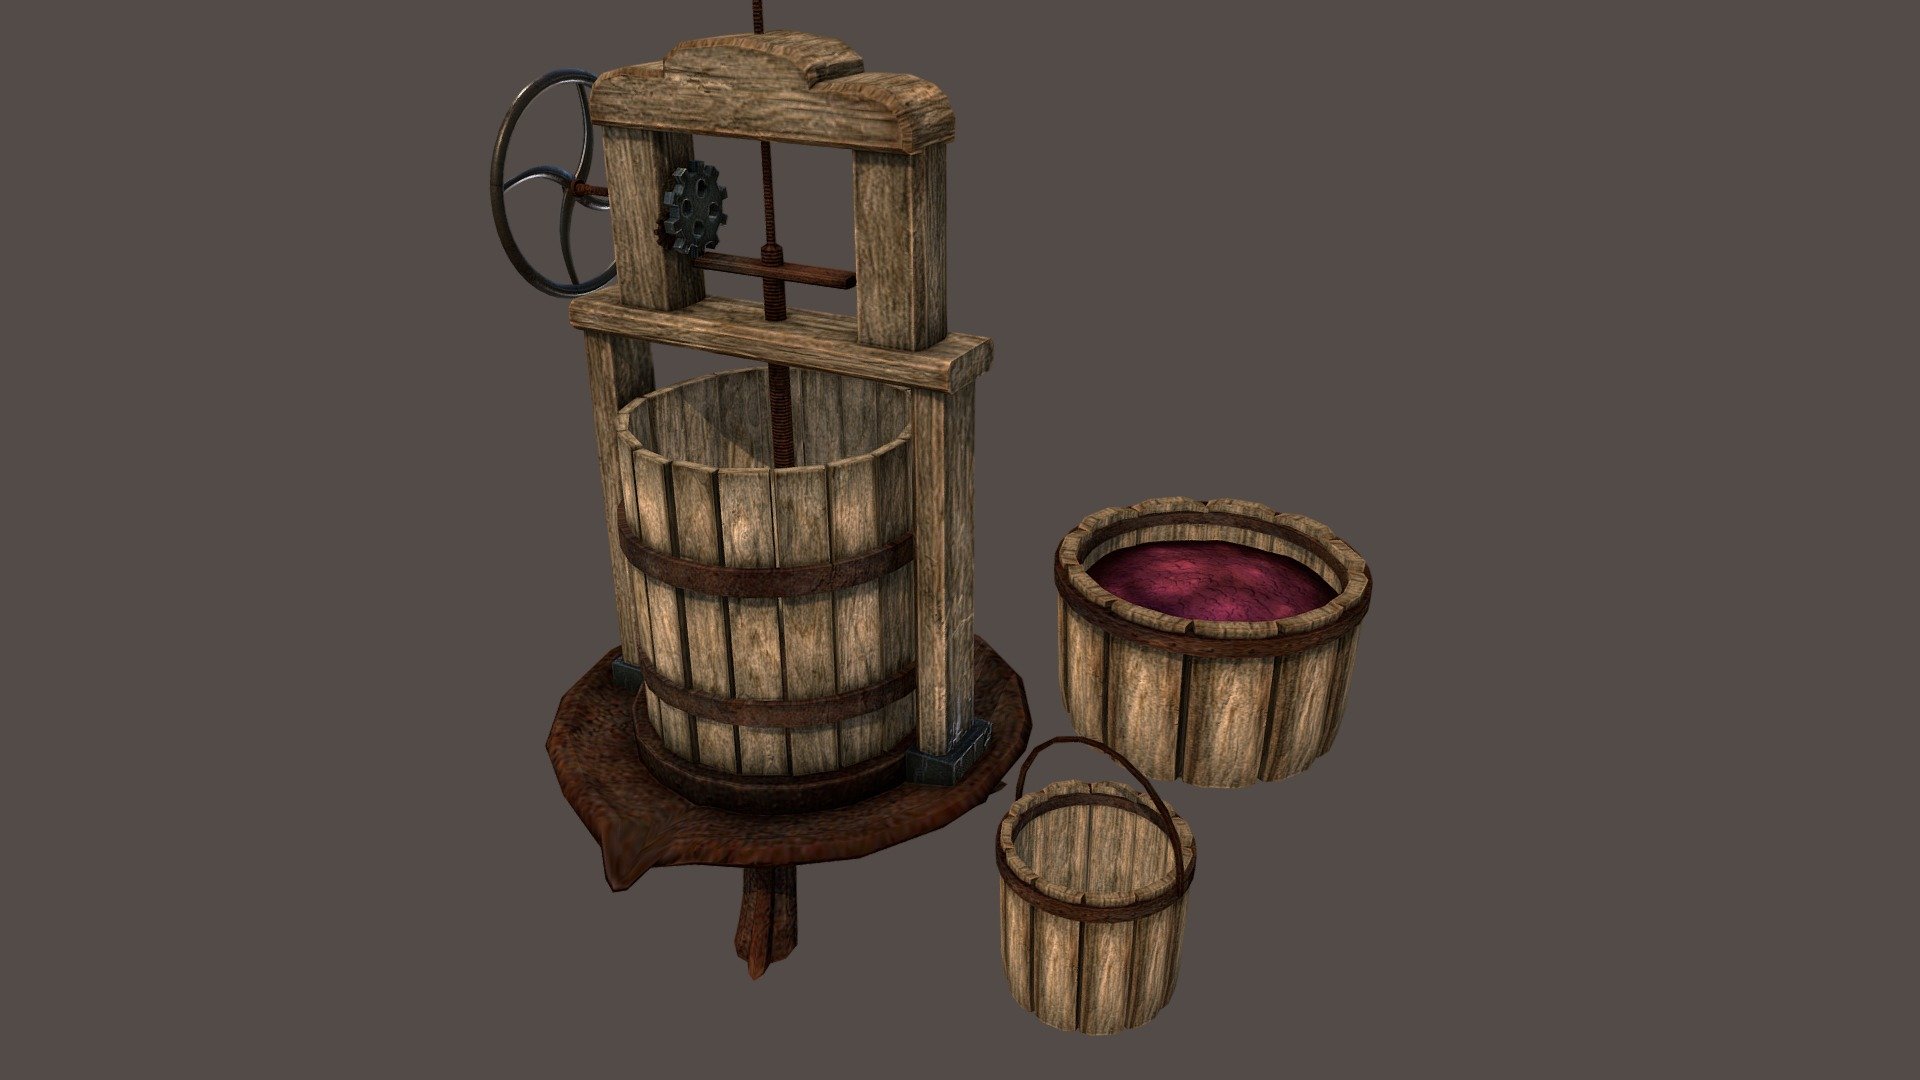 Collection of vineyard stuff I made for Beyond Skyrim, more assets i'm dumping here soon so strap in tight kids! - Vineyard Wine Press - 3D model by bridgedpolys 3d model